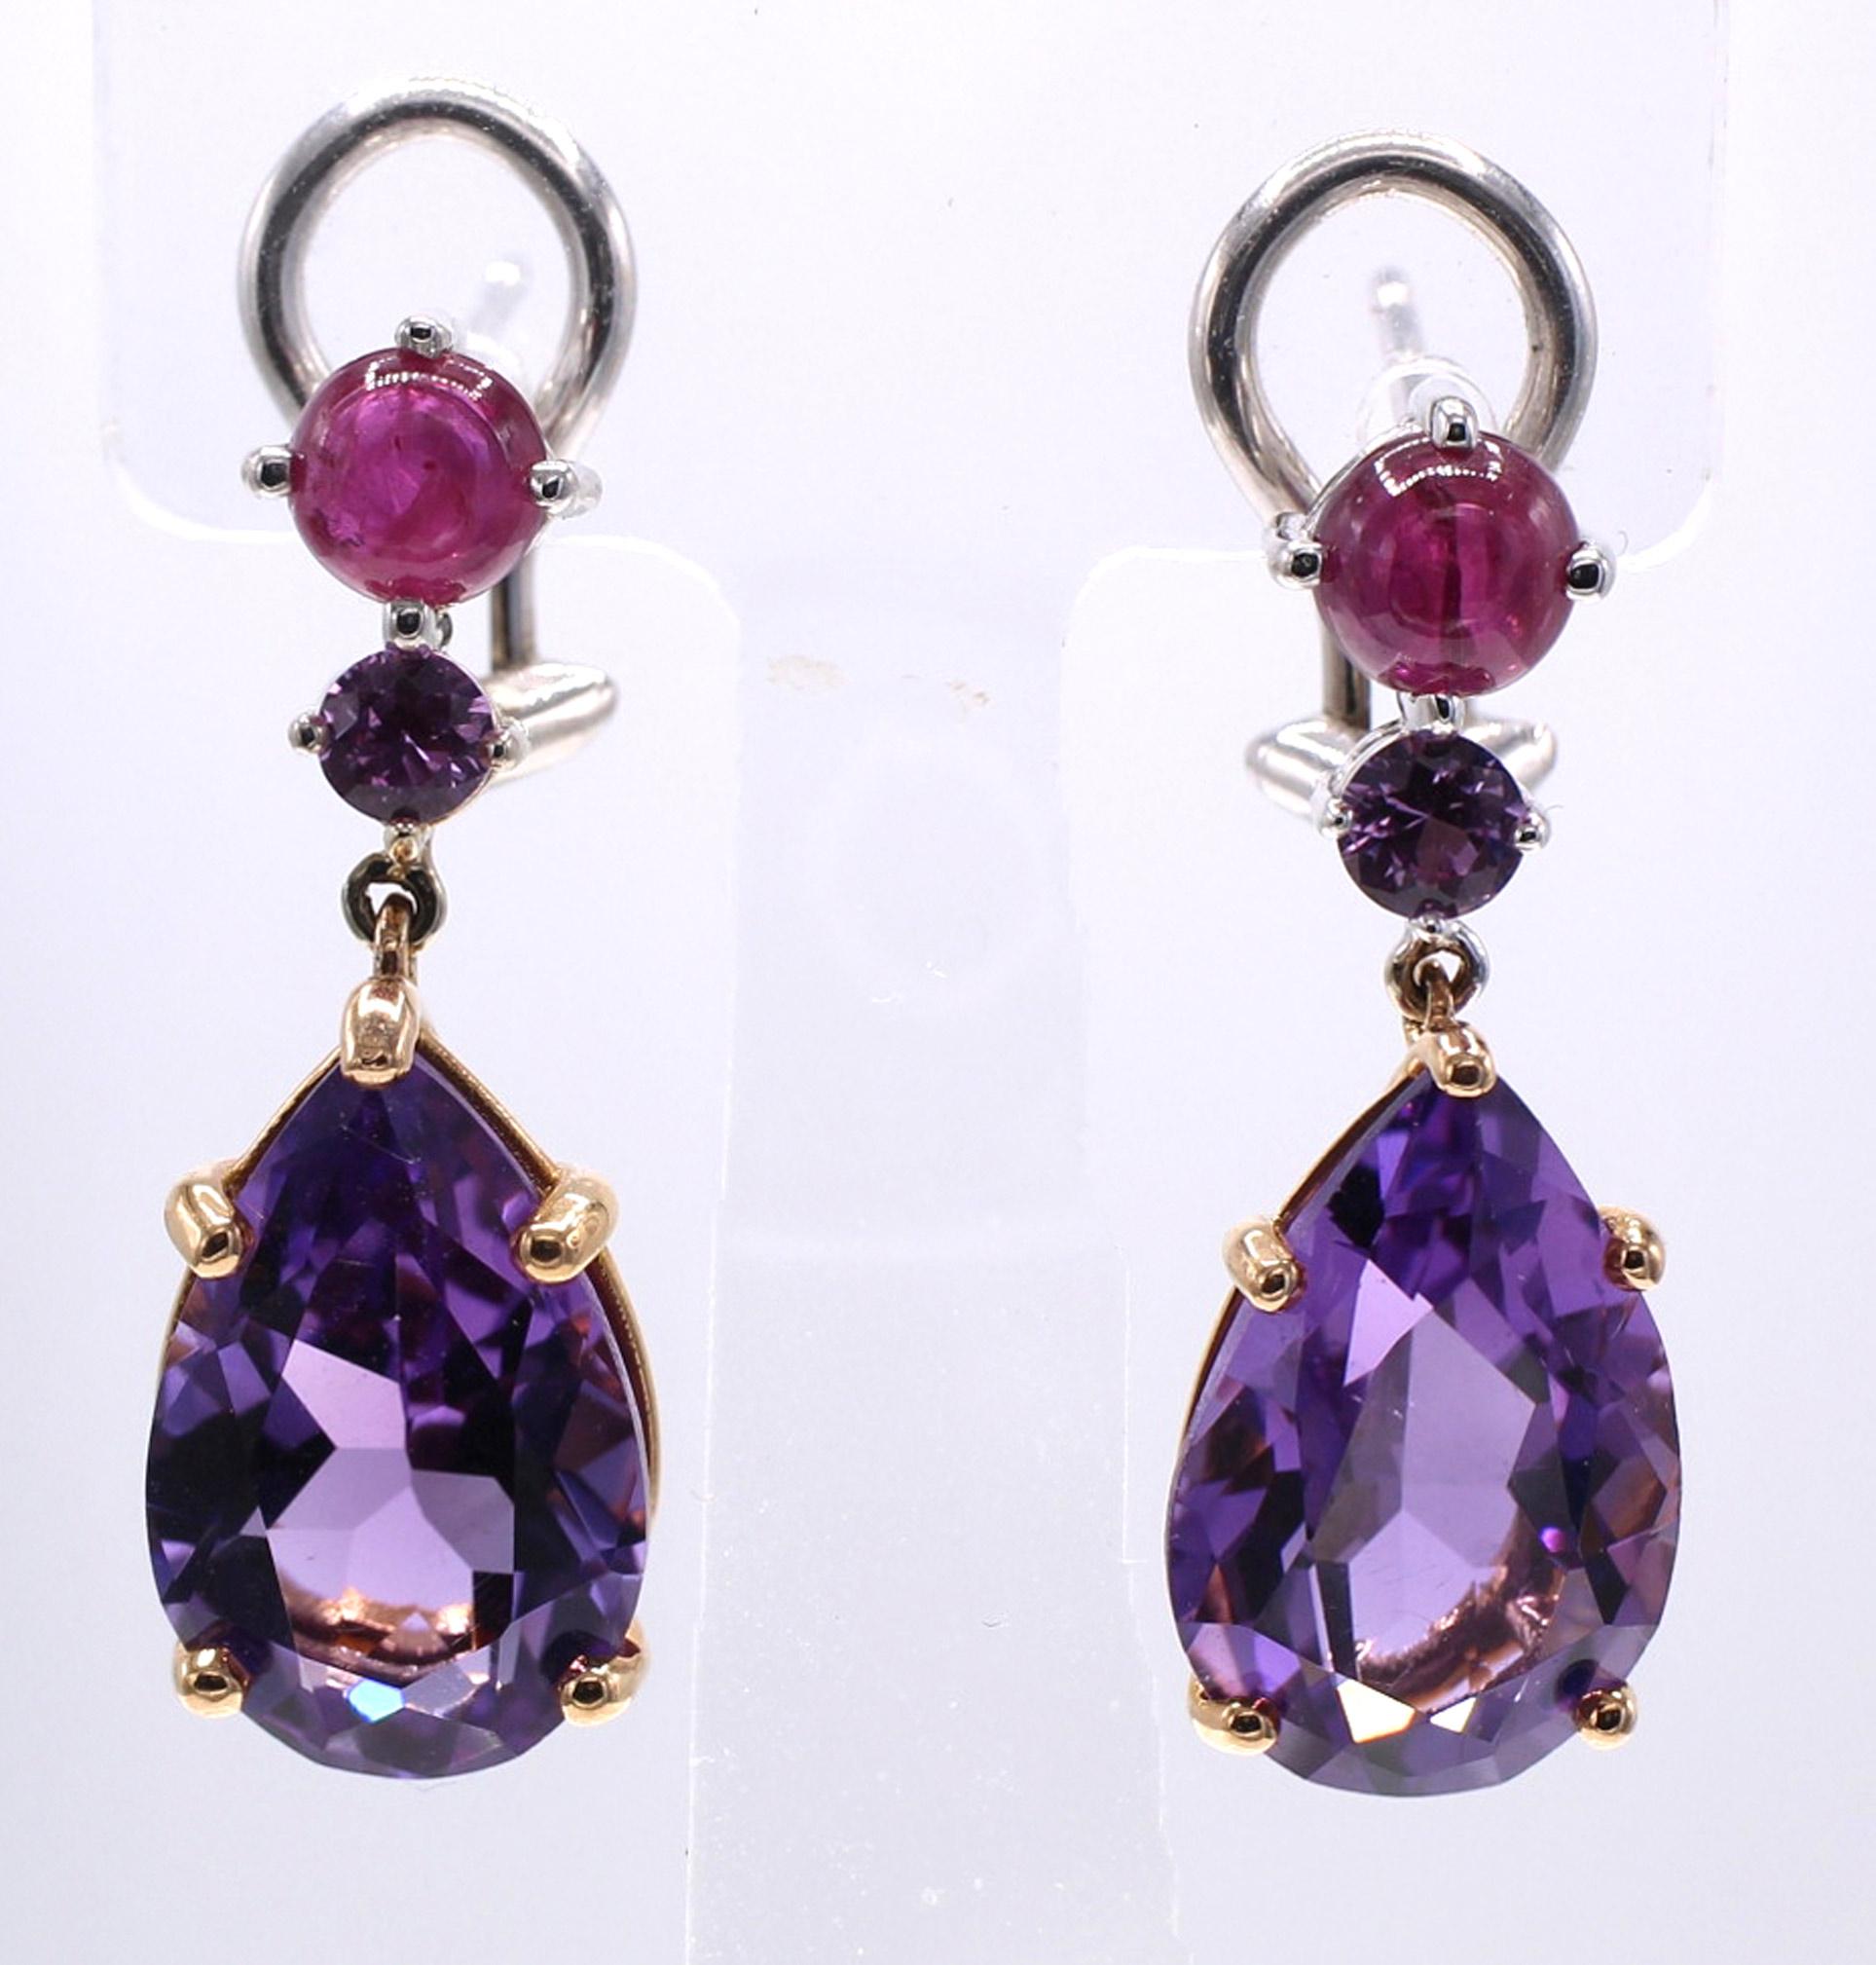 Charming and fun, colorful pendant earrings, set with one larger pear shape Amethyst set in 18 karat rose gold, a vibrant round pink sapphire and a bright red cabochon ruby set in 18 karat white gold. The Amethyst is flexibly connected to the top